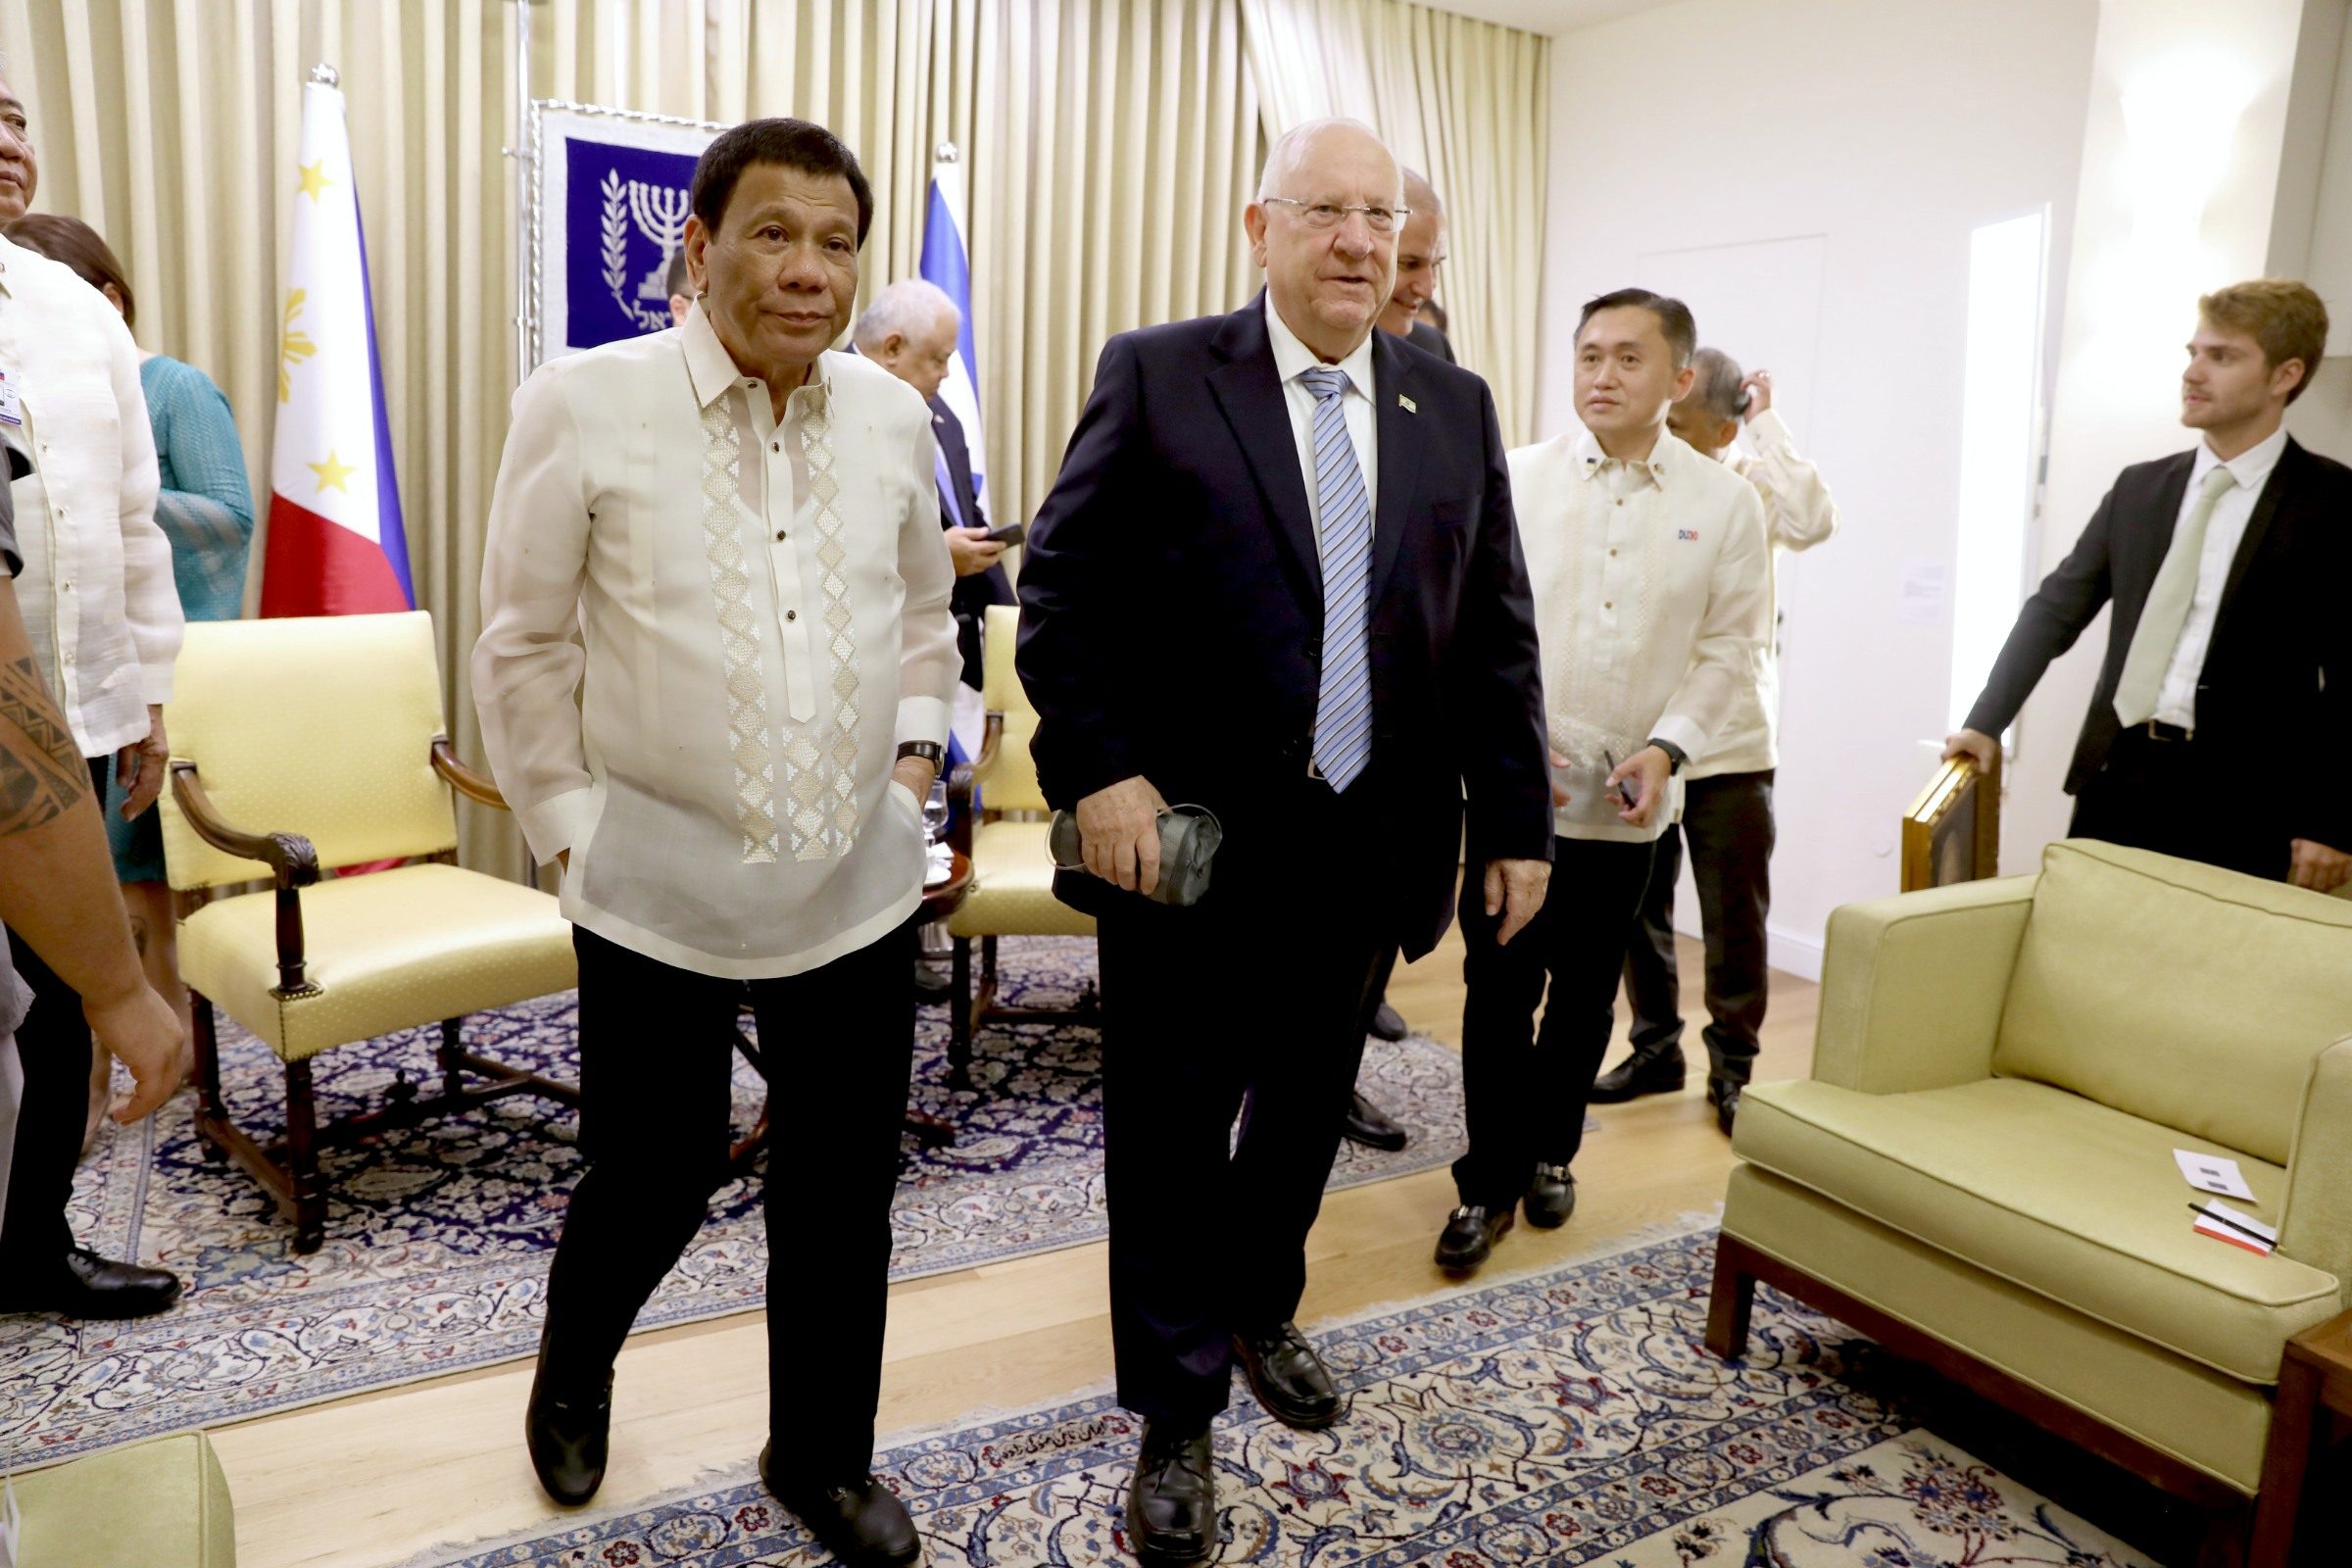 ARMS PROVIDER. President Duterte tells Israeli President Reuven Rivlin that the Philippines will buy military equipment 'only' from Israel. Malacañang photo 